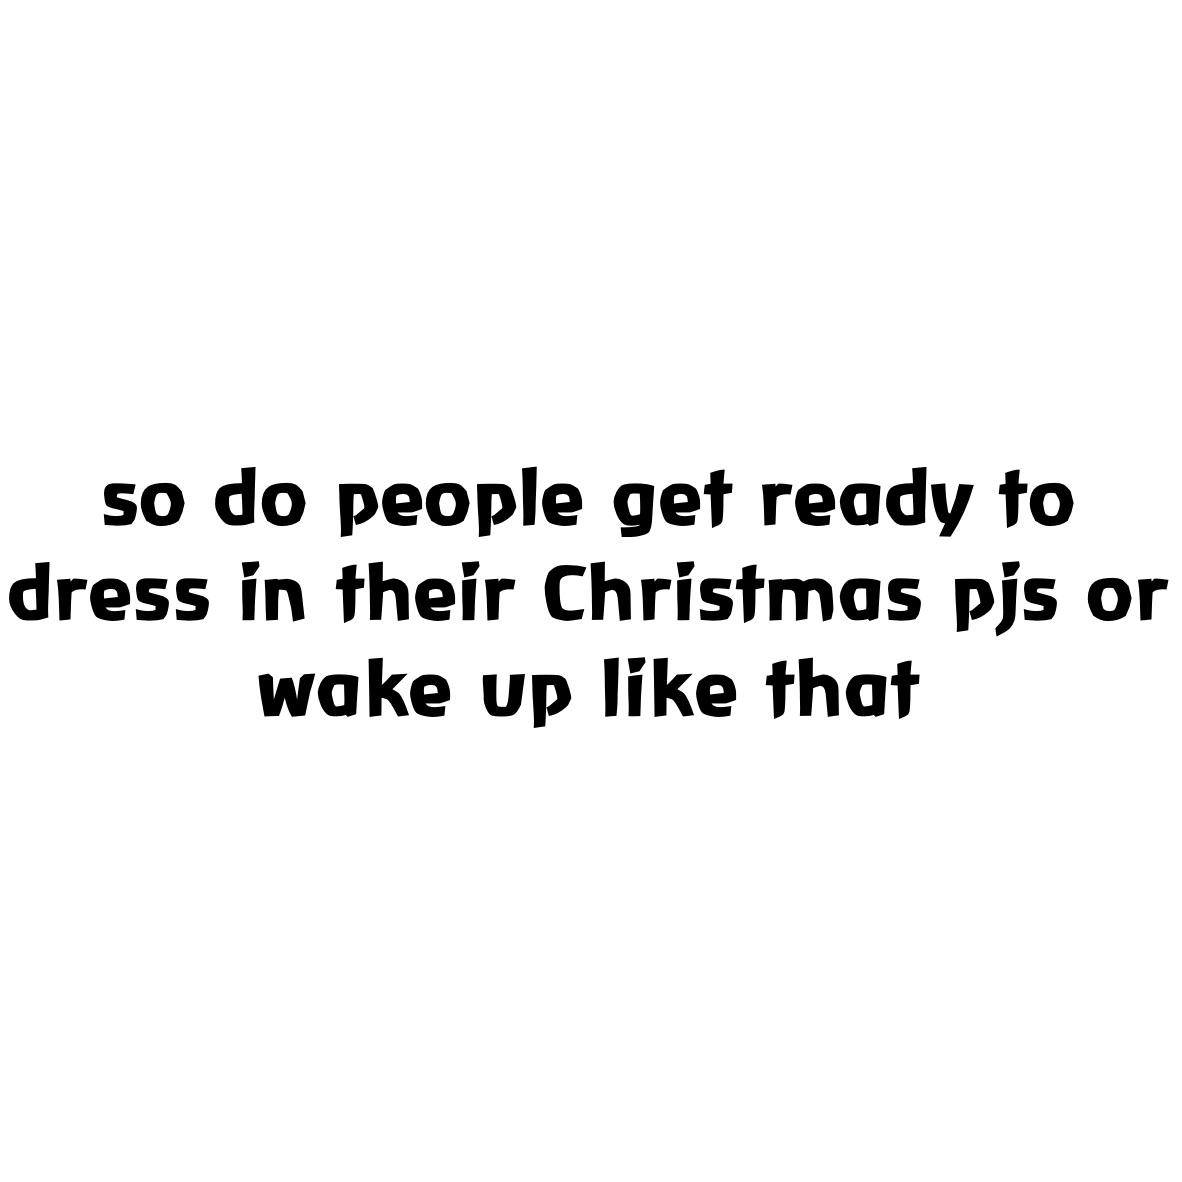 so do people get ready to dress in their Christmas pjs or wake up like that